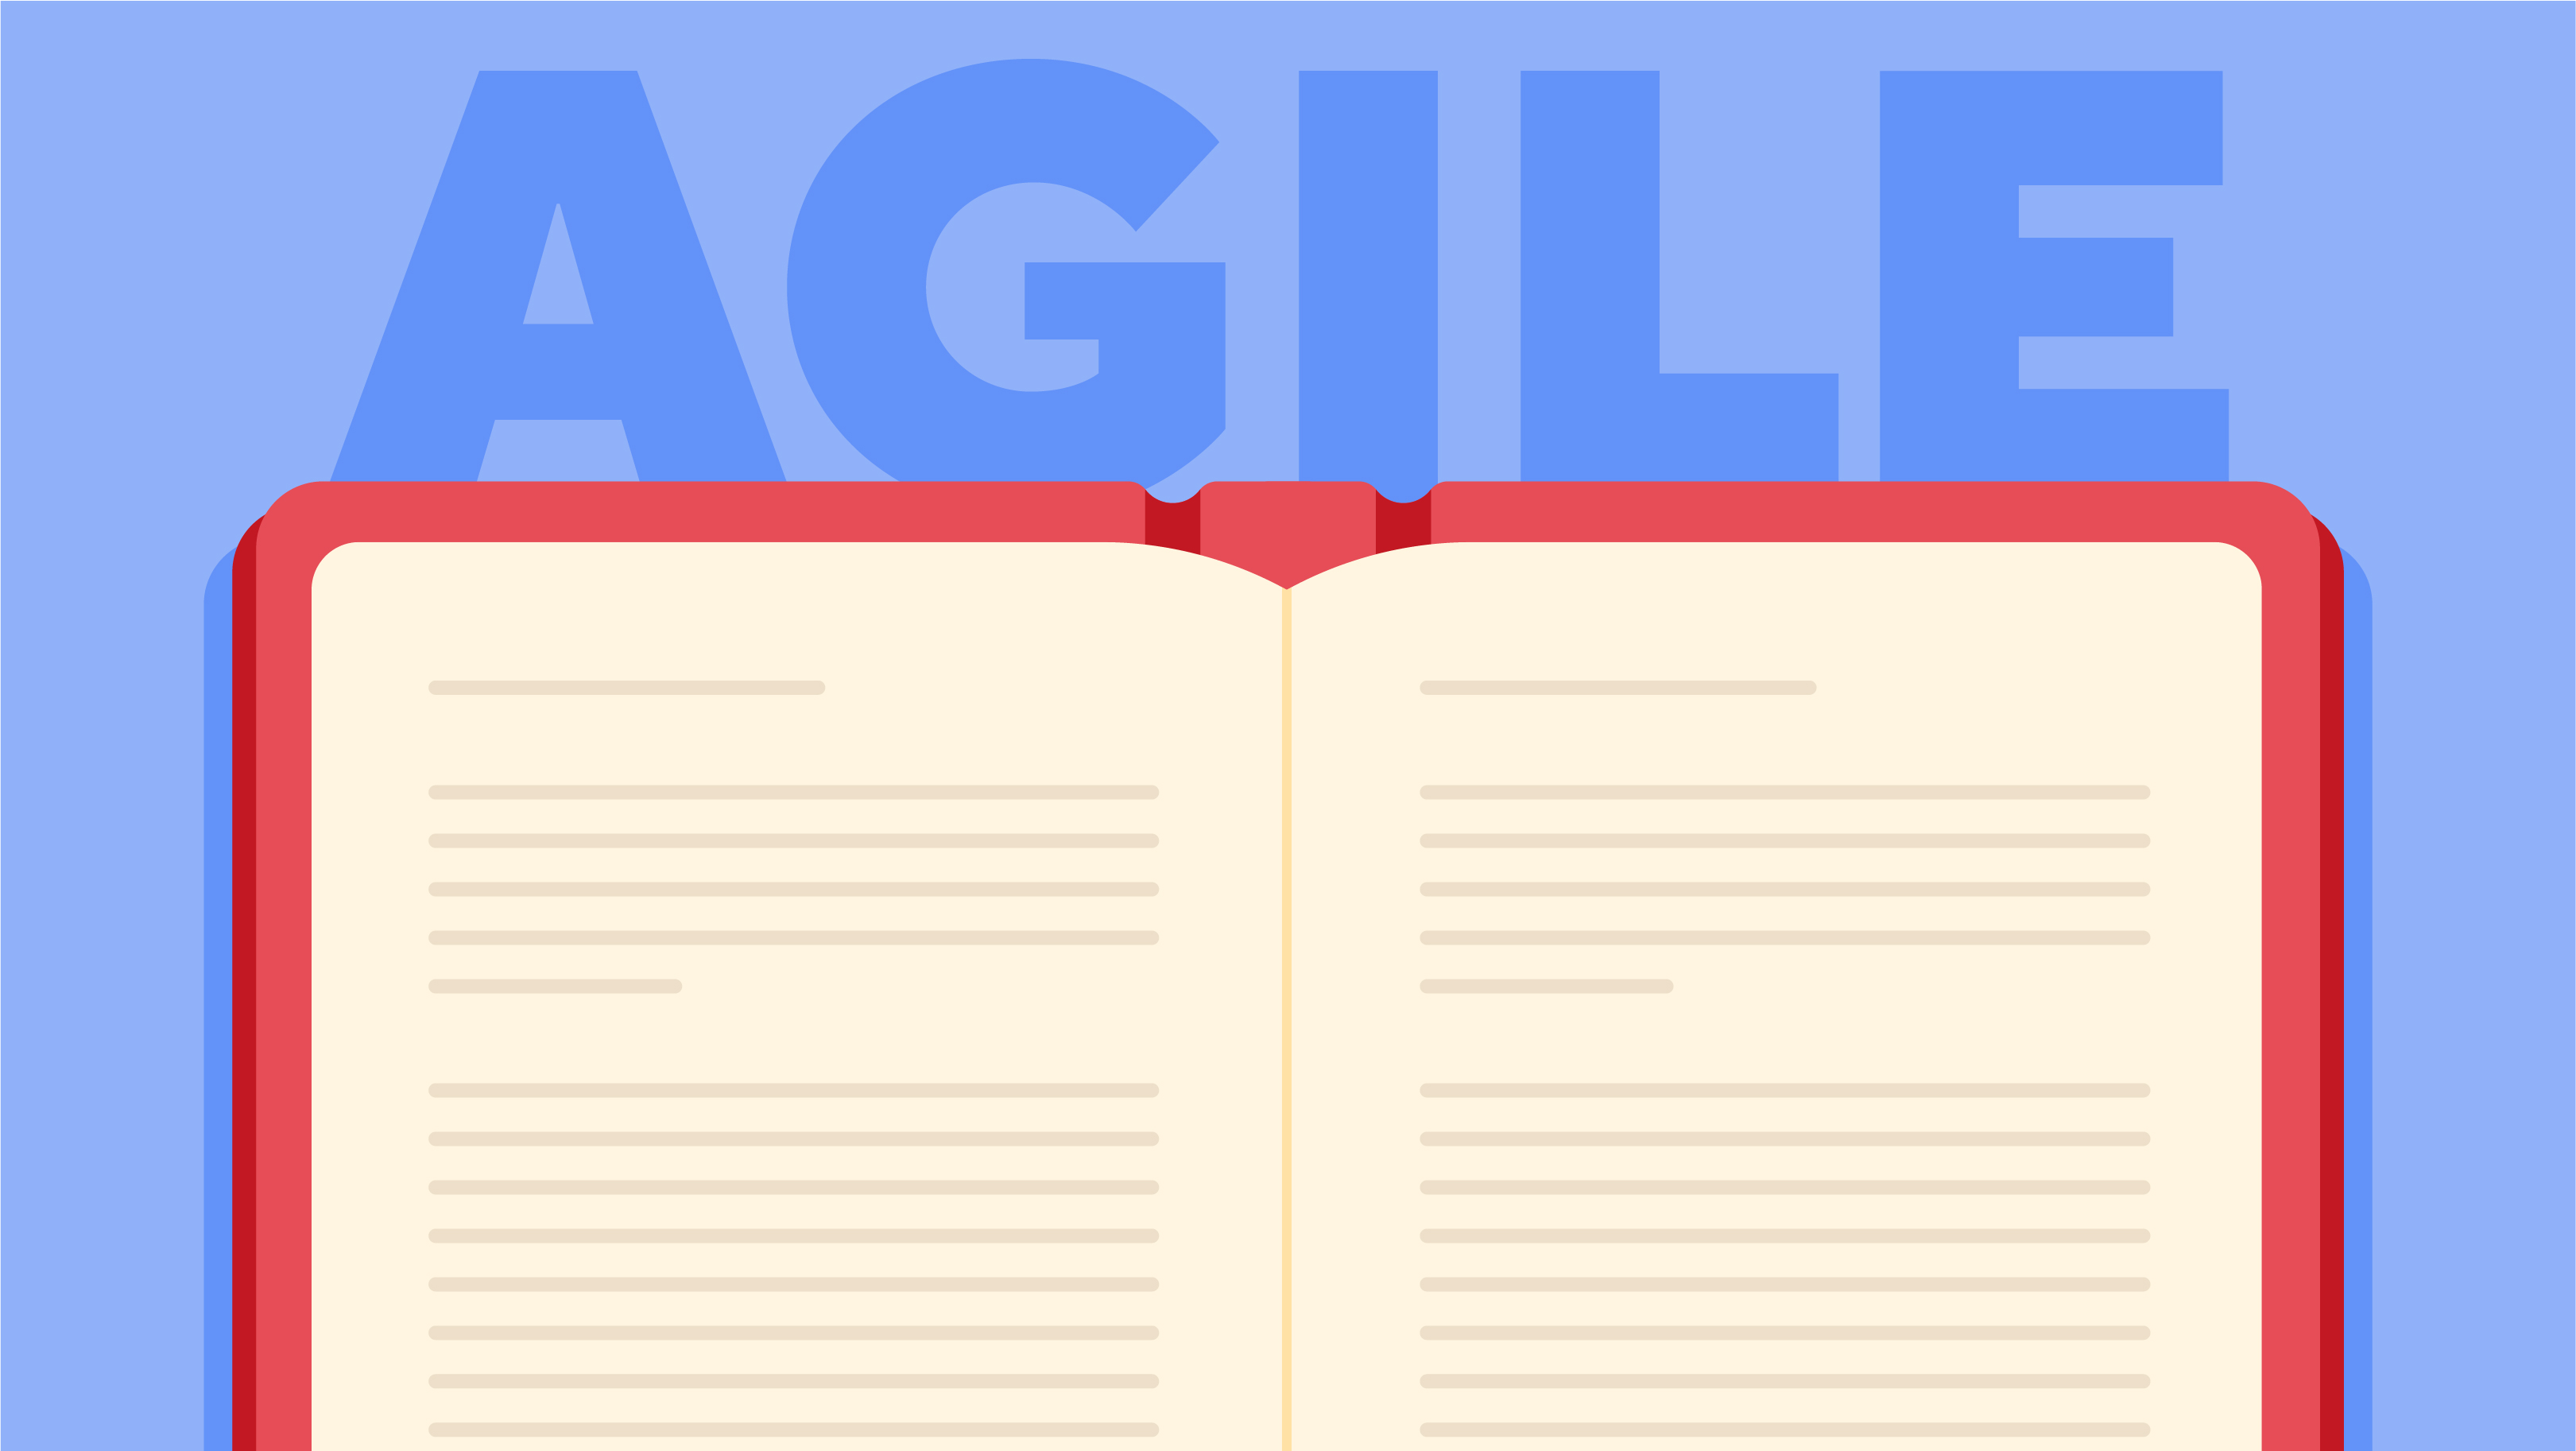 An open book with "AGILE" written in capital letters